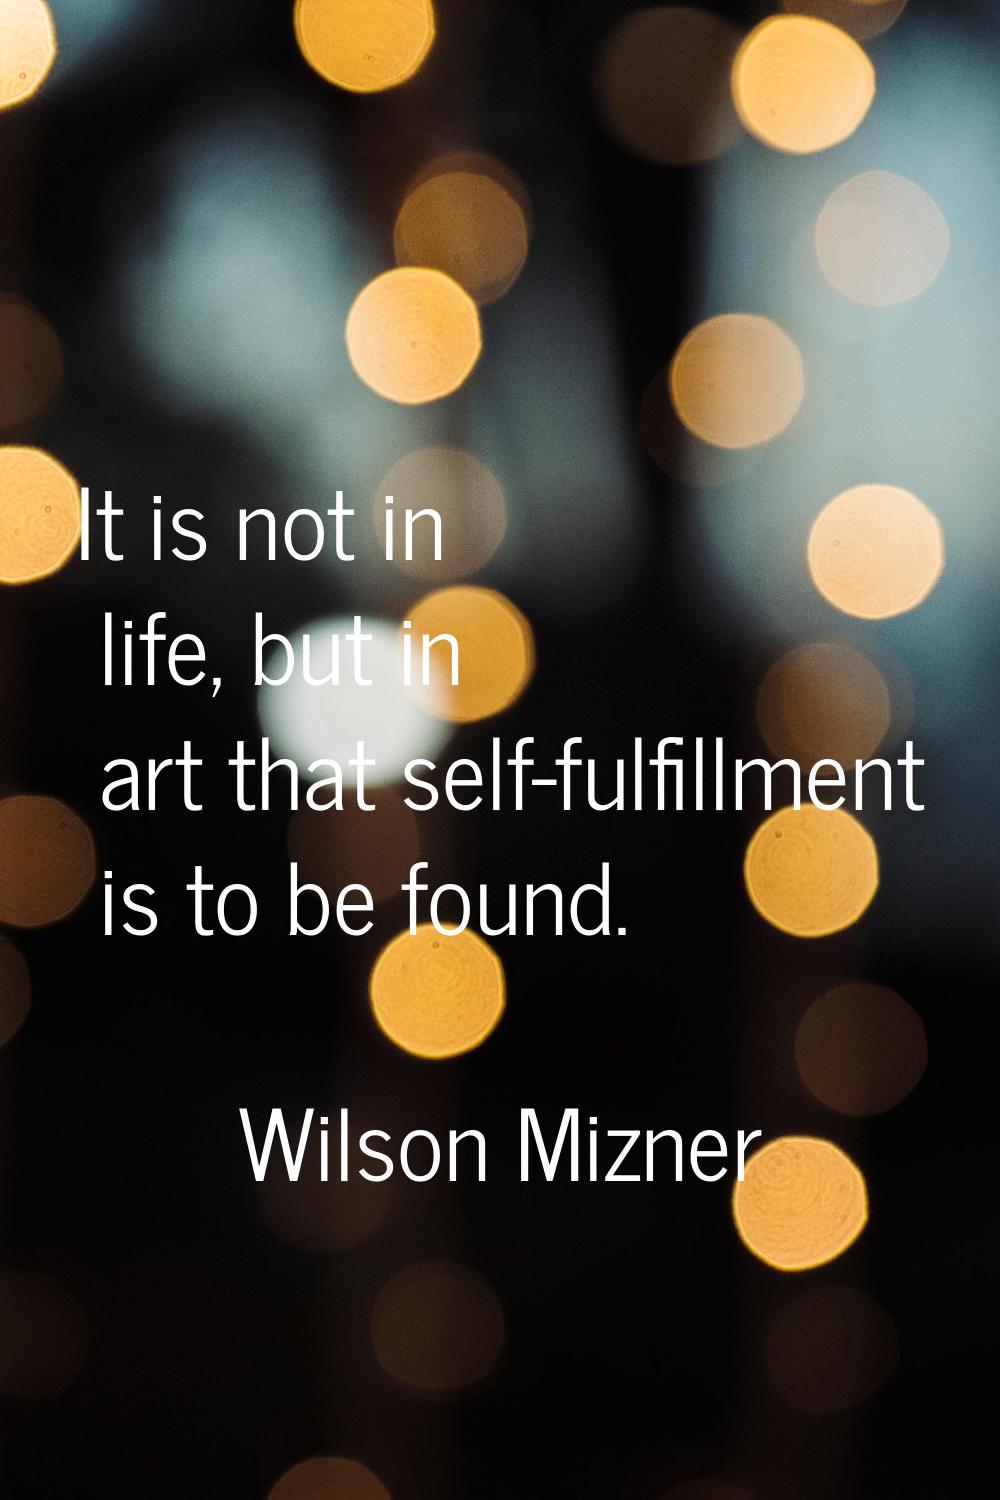 It is not in life, but in art that self-fulfillment is to be found.